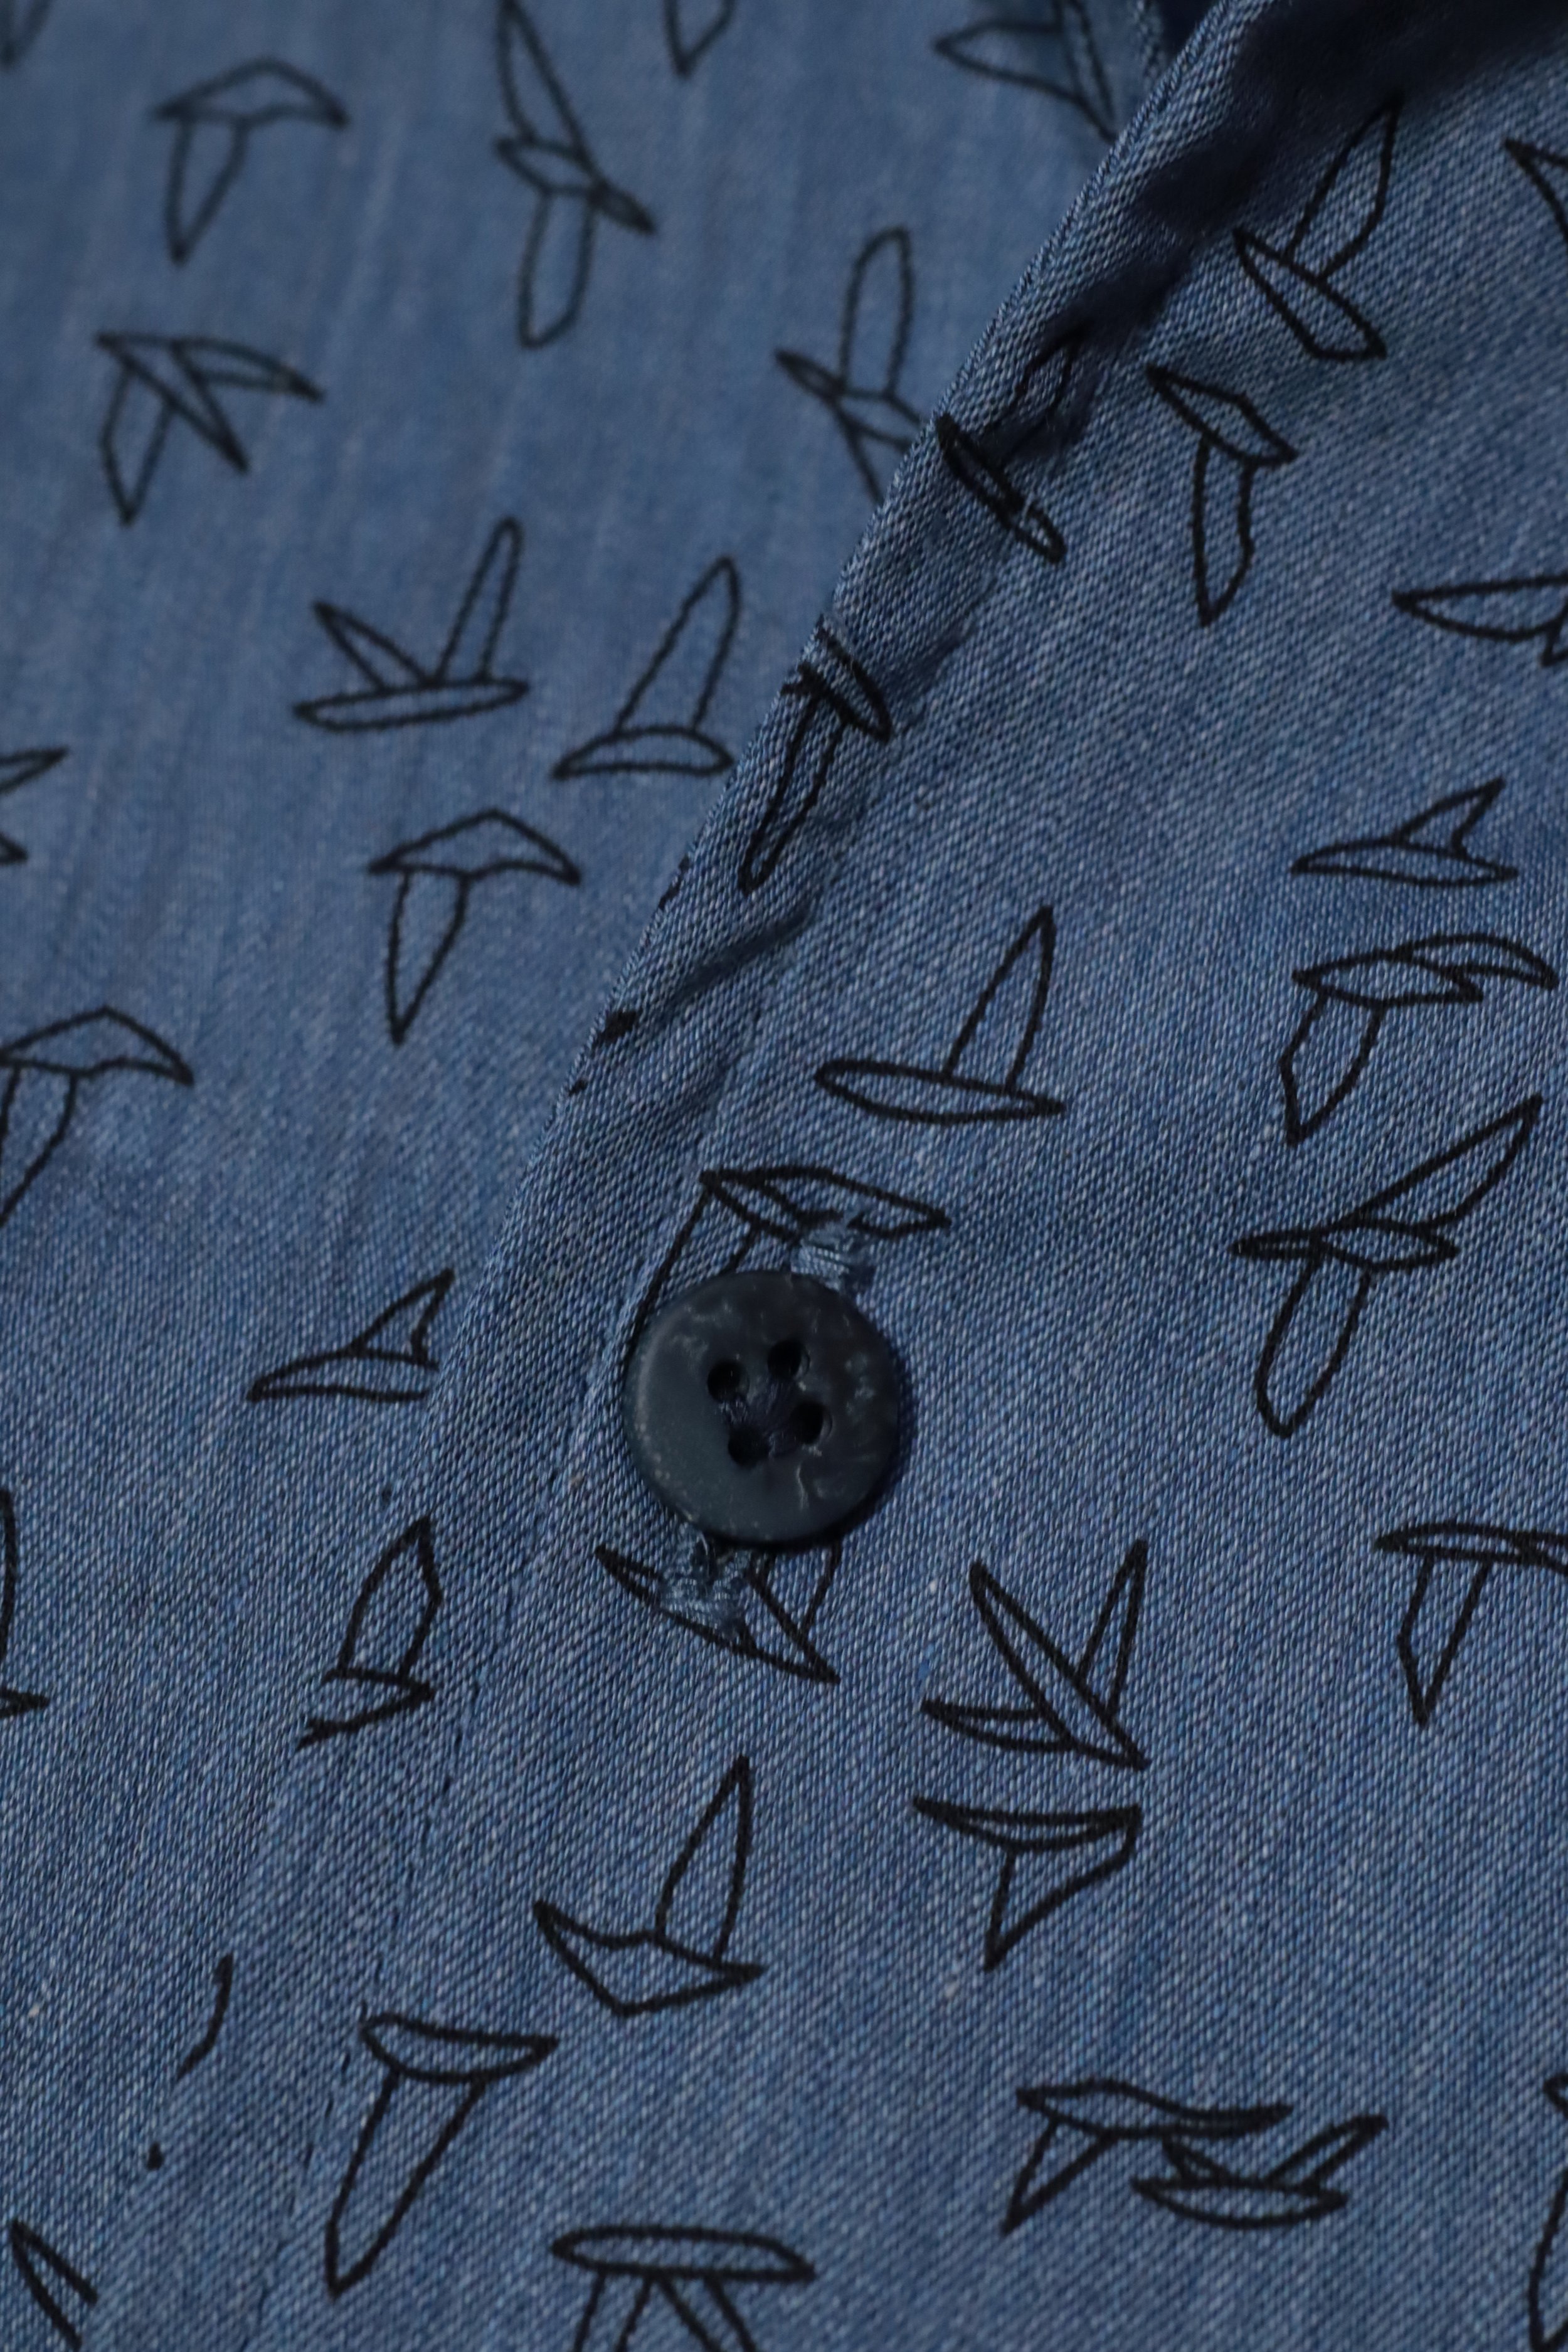 Horn Button Mockingbird Blue Chambray One Piece Collar | Made Suits SIngapore Tailor Made Shirts | Wannabe French Cuffs Made Suits BTM Bespoke to Measure Shirts.JPG